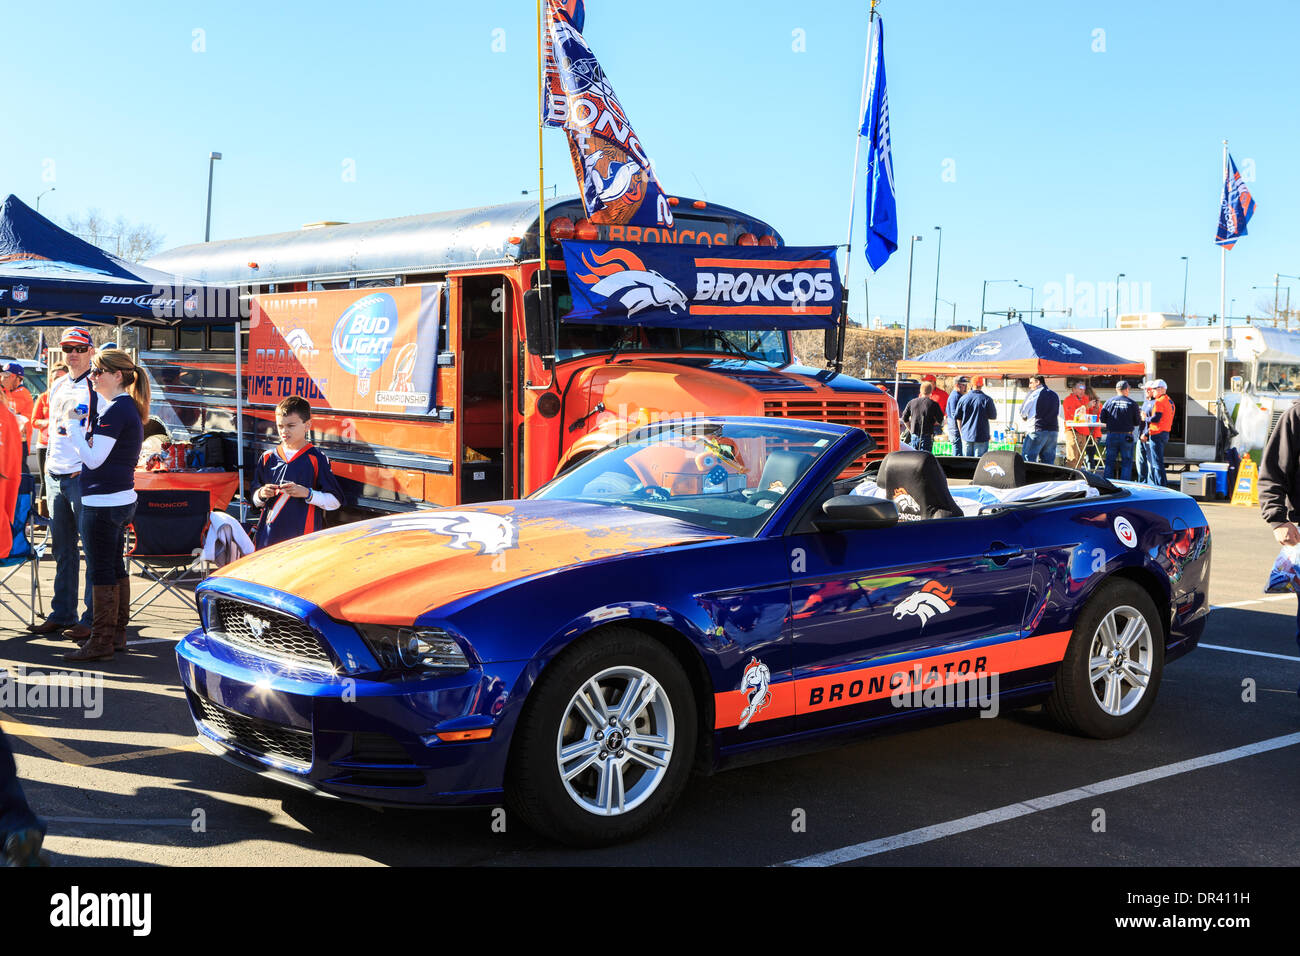 Denver, Colorado USA – 19 January 2014.  Football fans tailgate in the parking lot of Sports Authority Field at Mile High before the AFC playoff game between the Denver Broncos and New England Patriots. Credit:  Ed Endicott/Alamy Live News Stock Photo